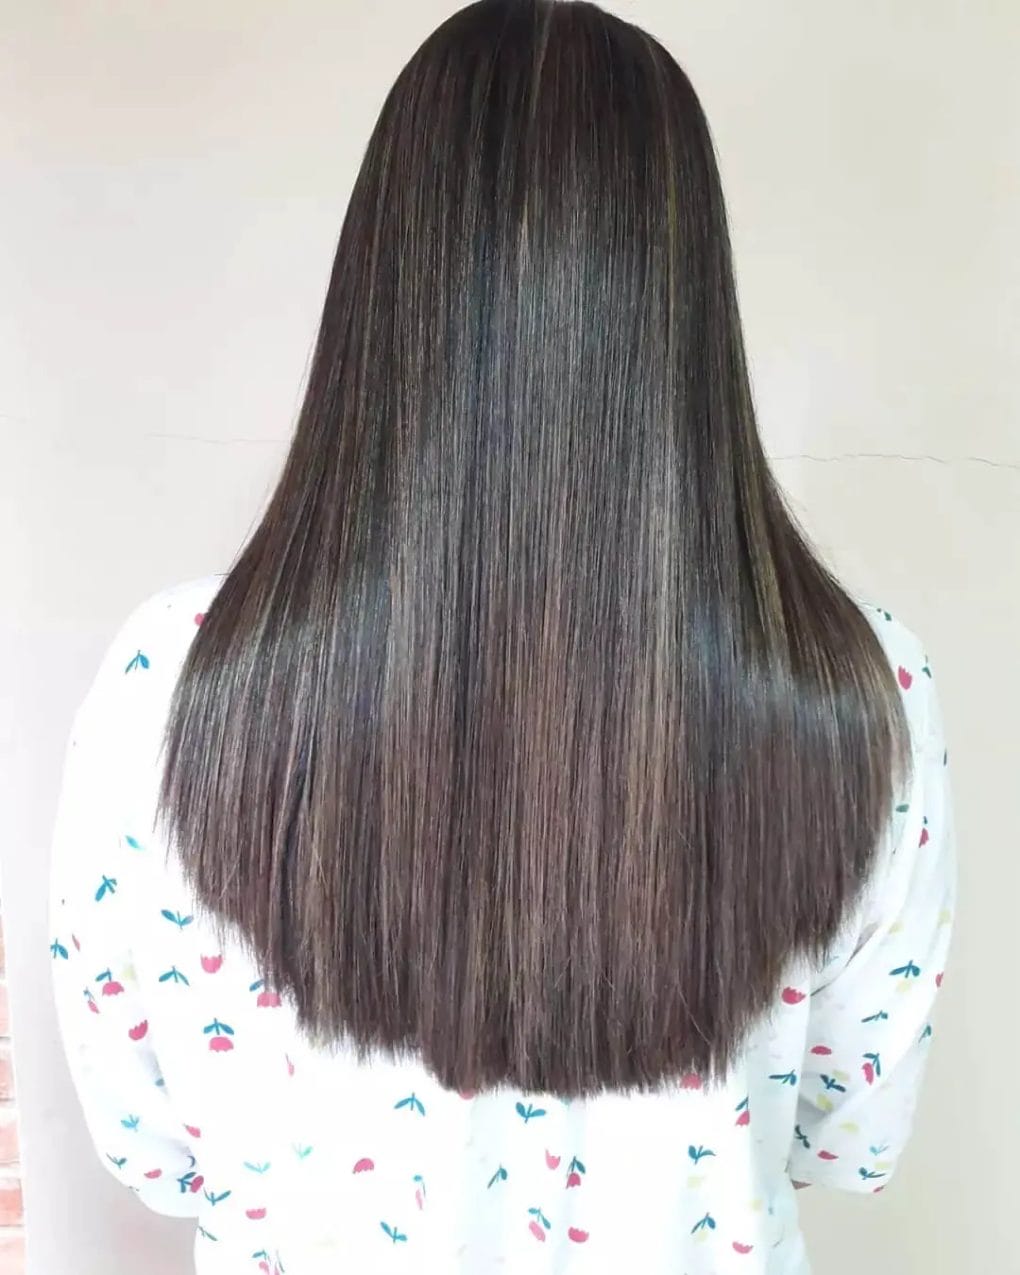 U-shaped brunette hair with sun-kissed balayage highlights and natural root gradation.
